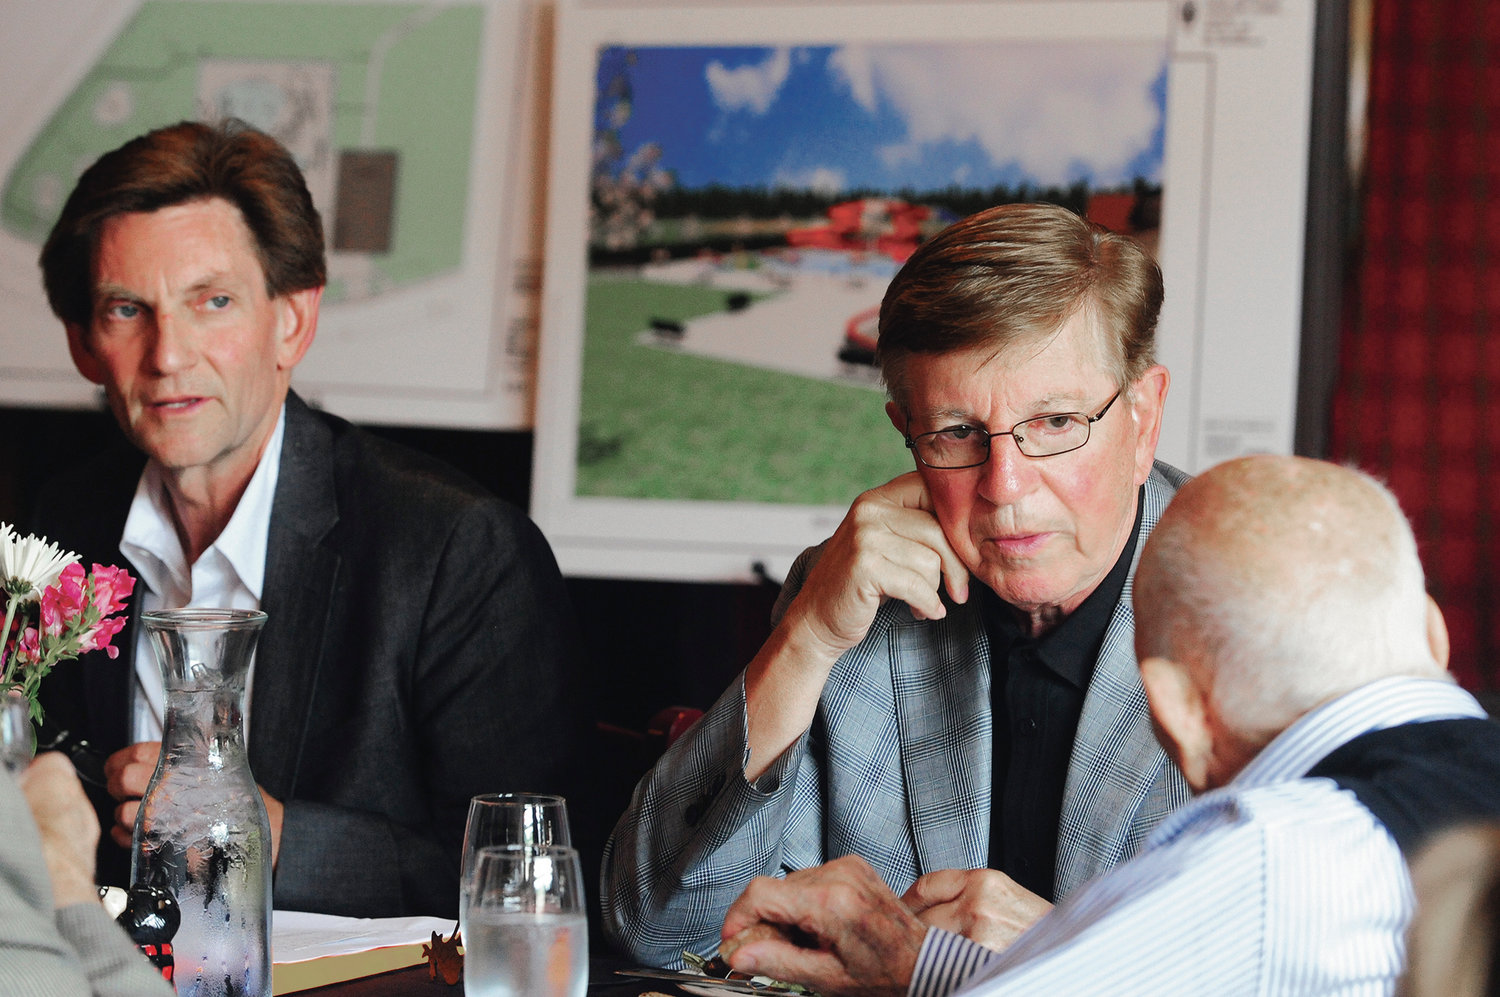 Kevin Smith, left, and his brother, Orin Smith, listen to Gail Shaw speak while at a Chehalis Foundation luncheon at Mackinaw's in Chehalis in this July 2013 file photo.